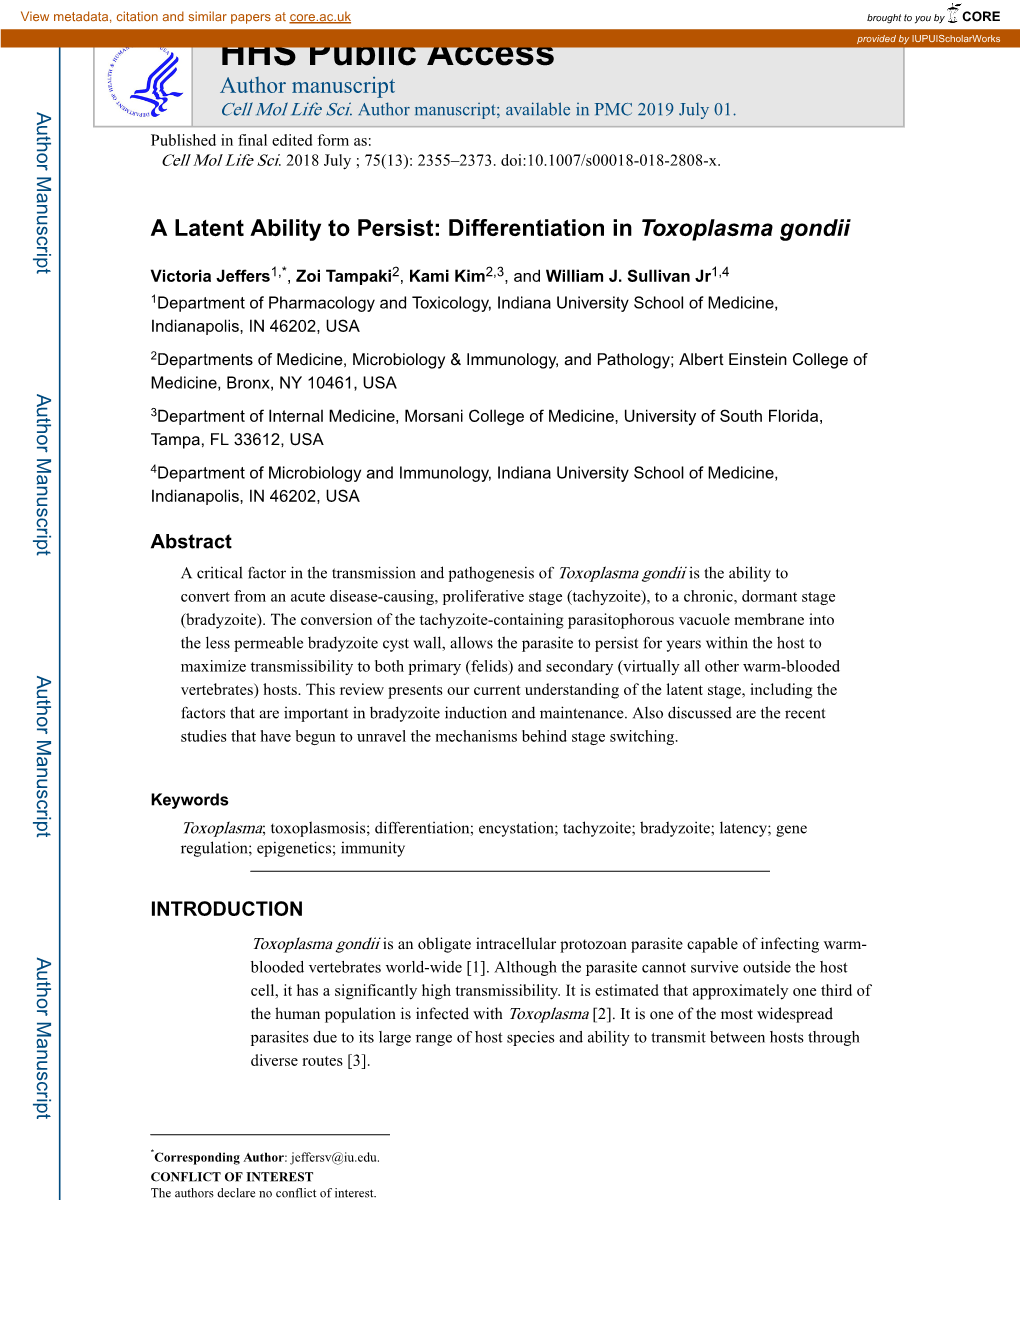 A Latent Ability to Persist: Differentiation in Toxoplasma Gondii